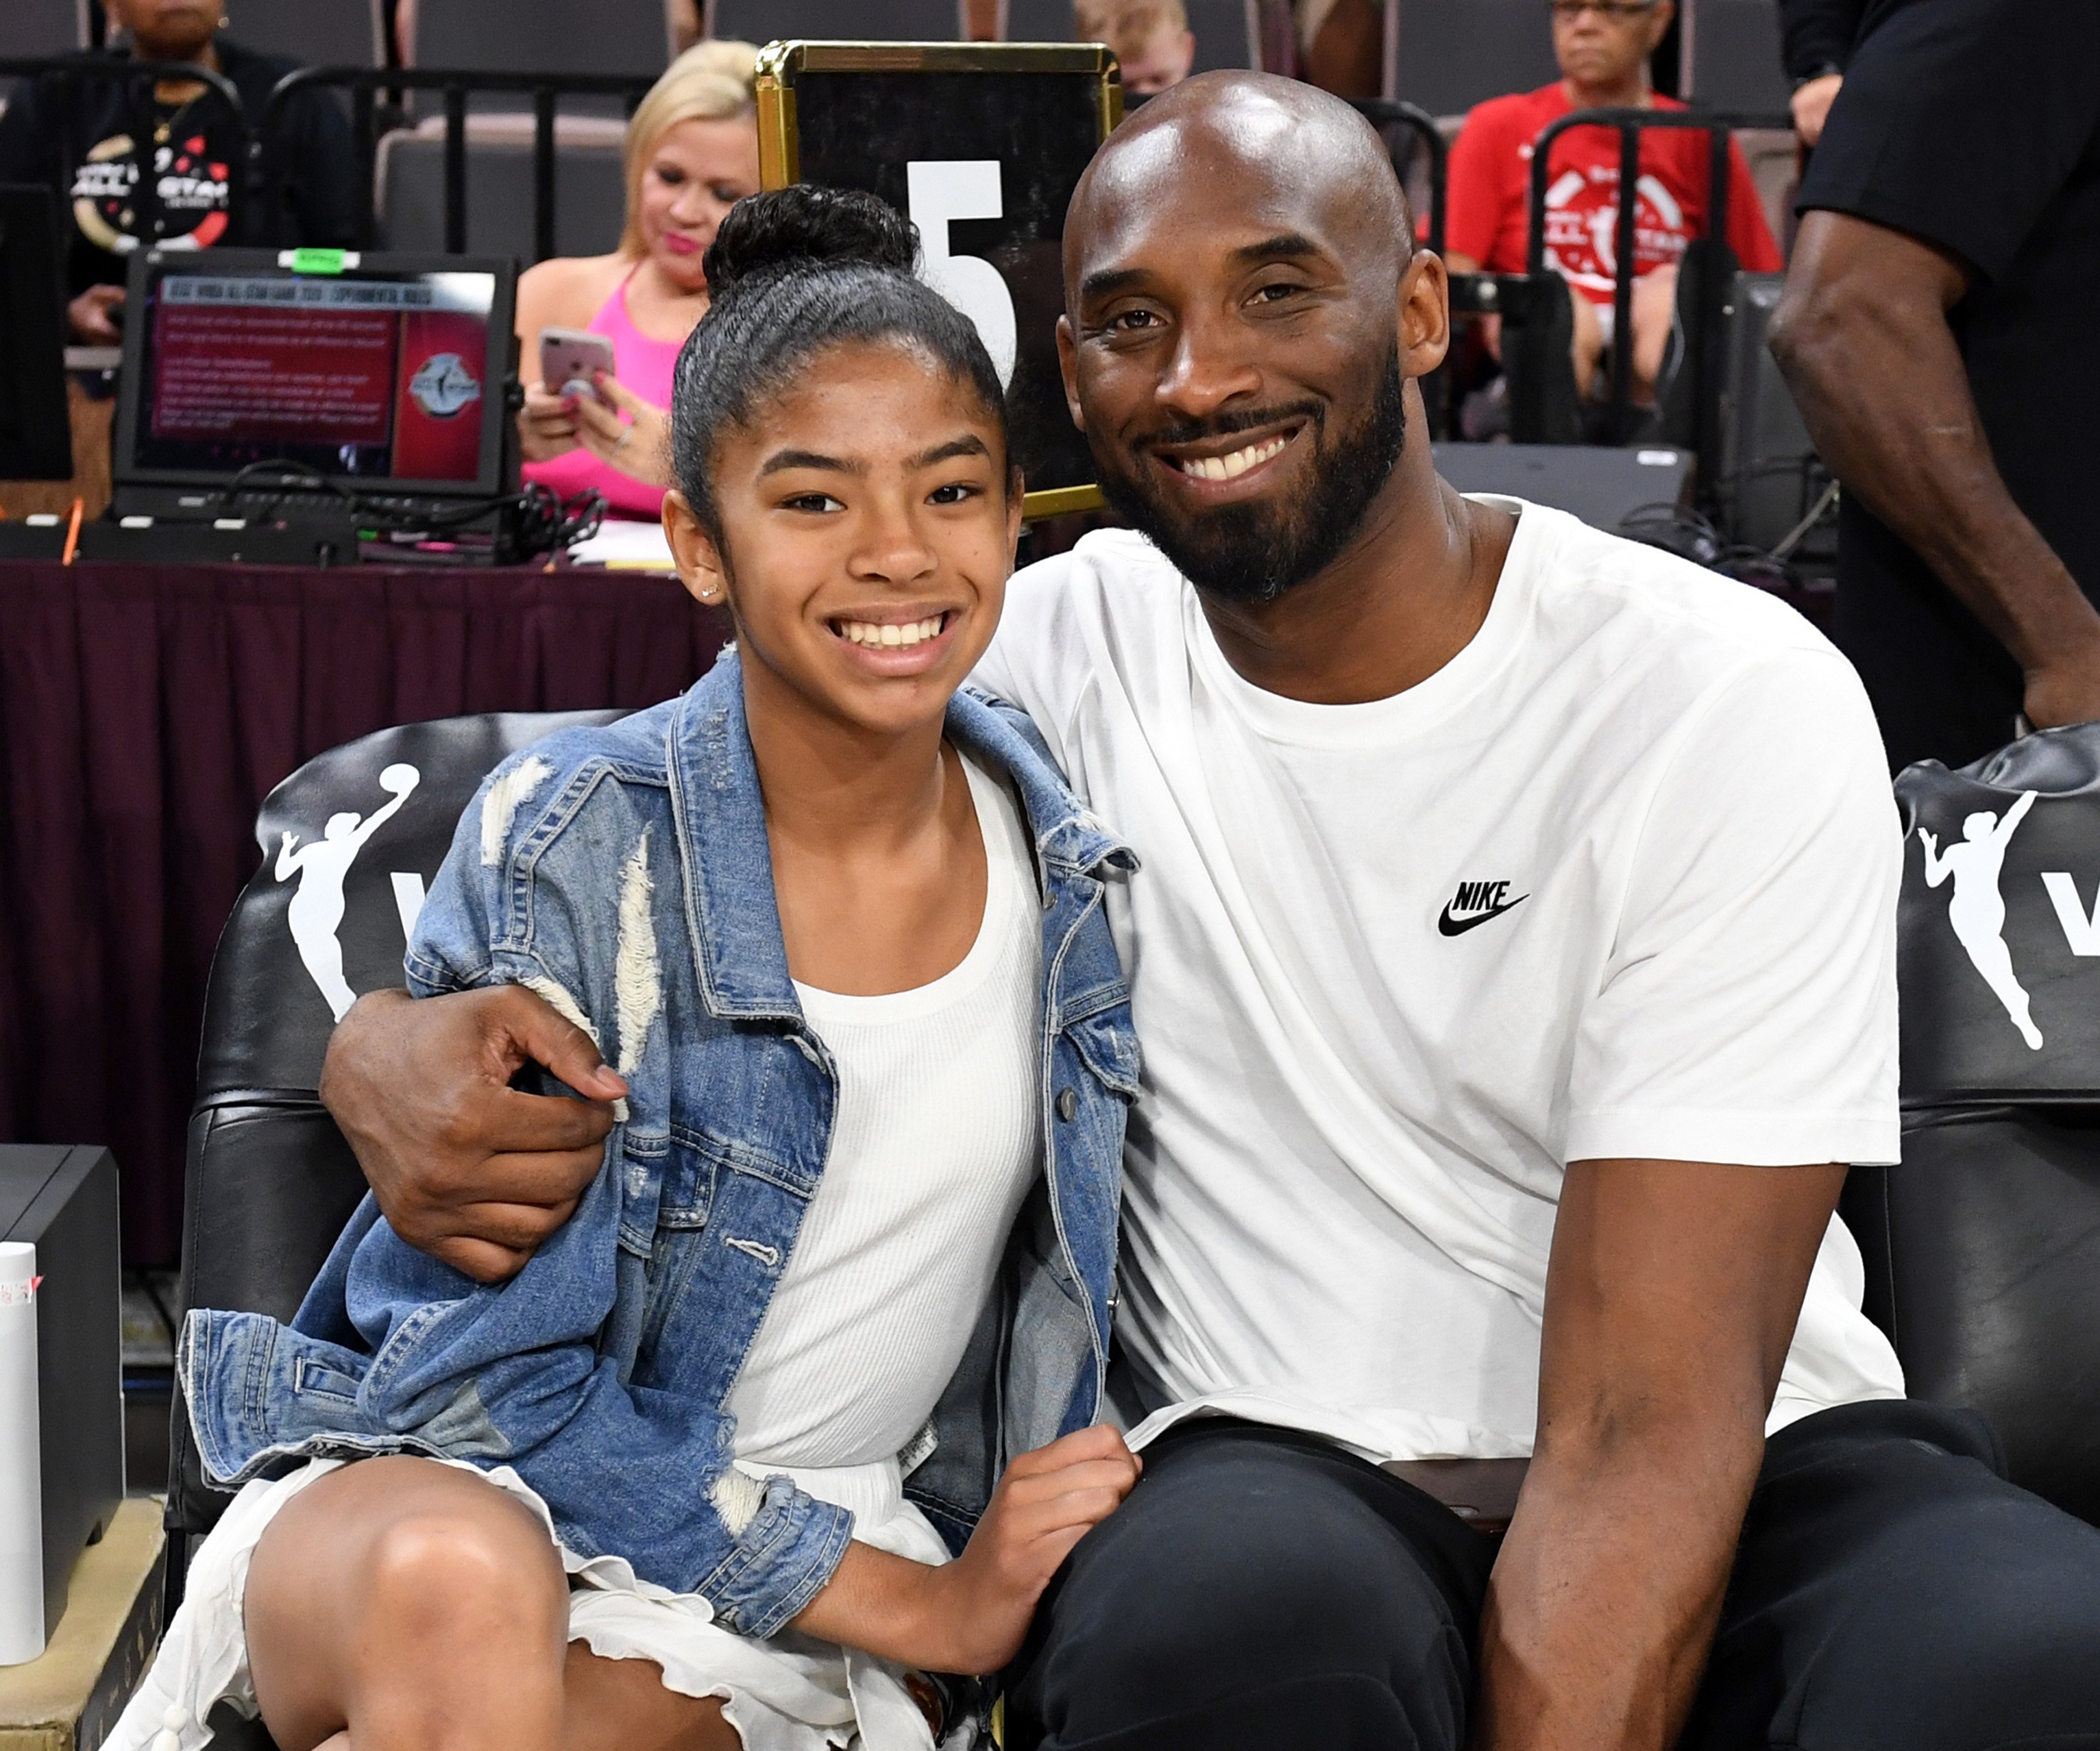 13-year-old Gianna and Kobe Bryant at the WNBA All-Star Game in July 2019 | Photo: Getty Images